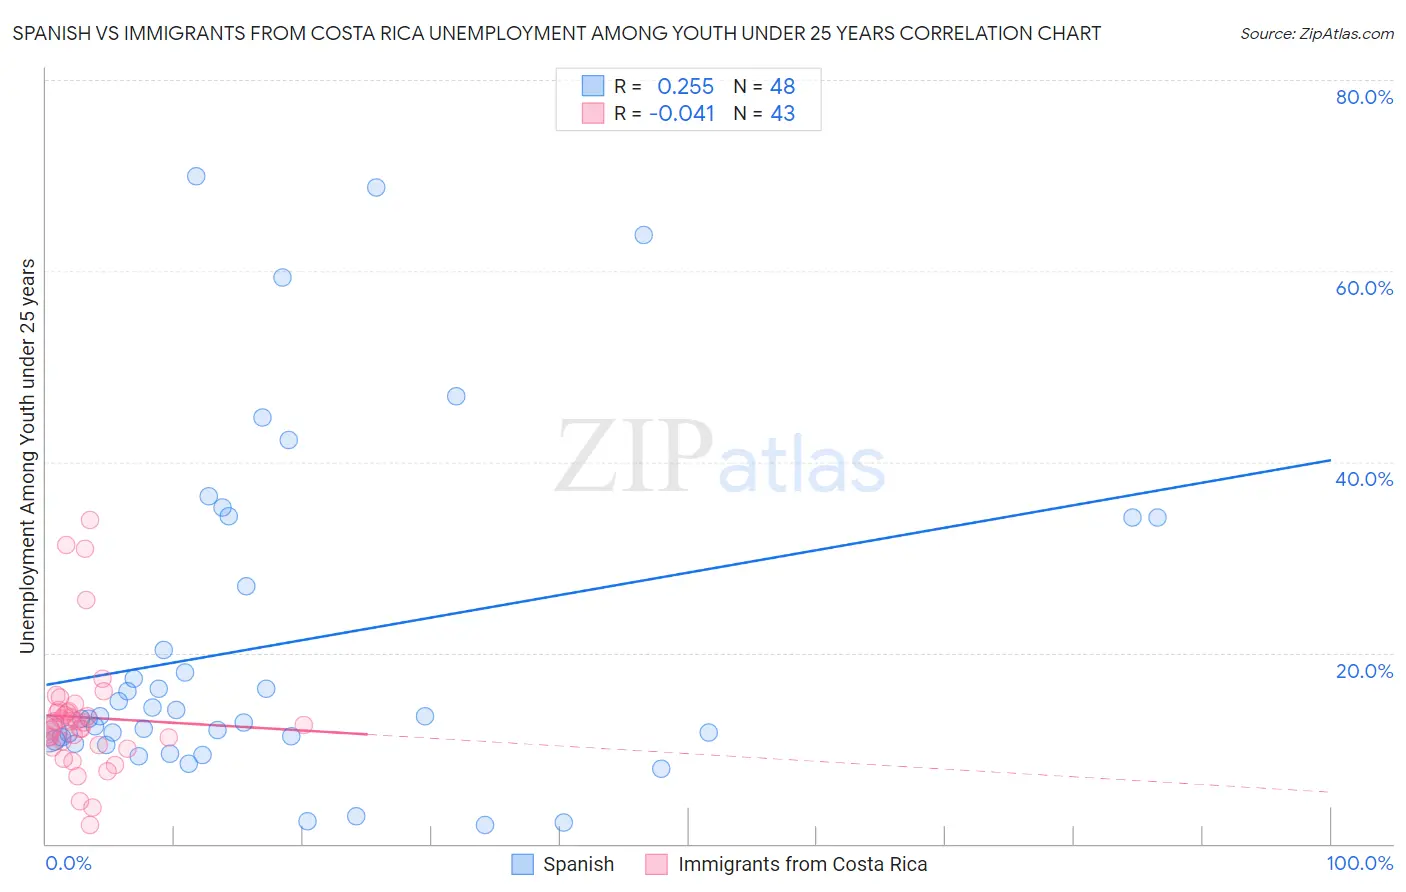 Spanish vs Immigrants from Costa Rica Unemployment Among Youth under 25 years